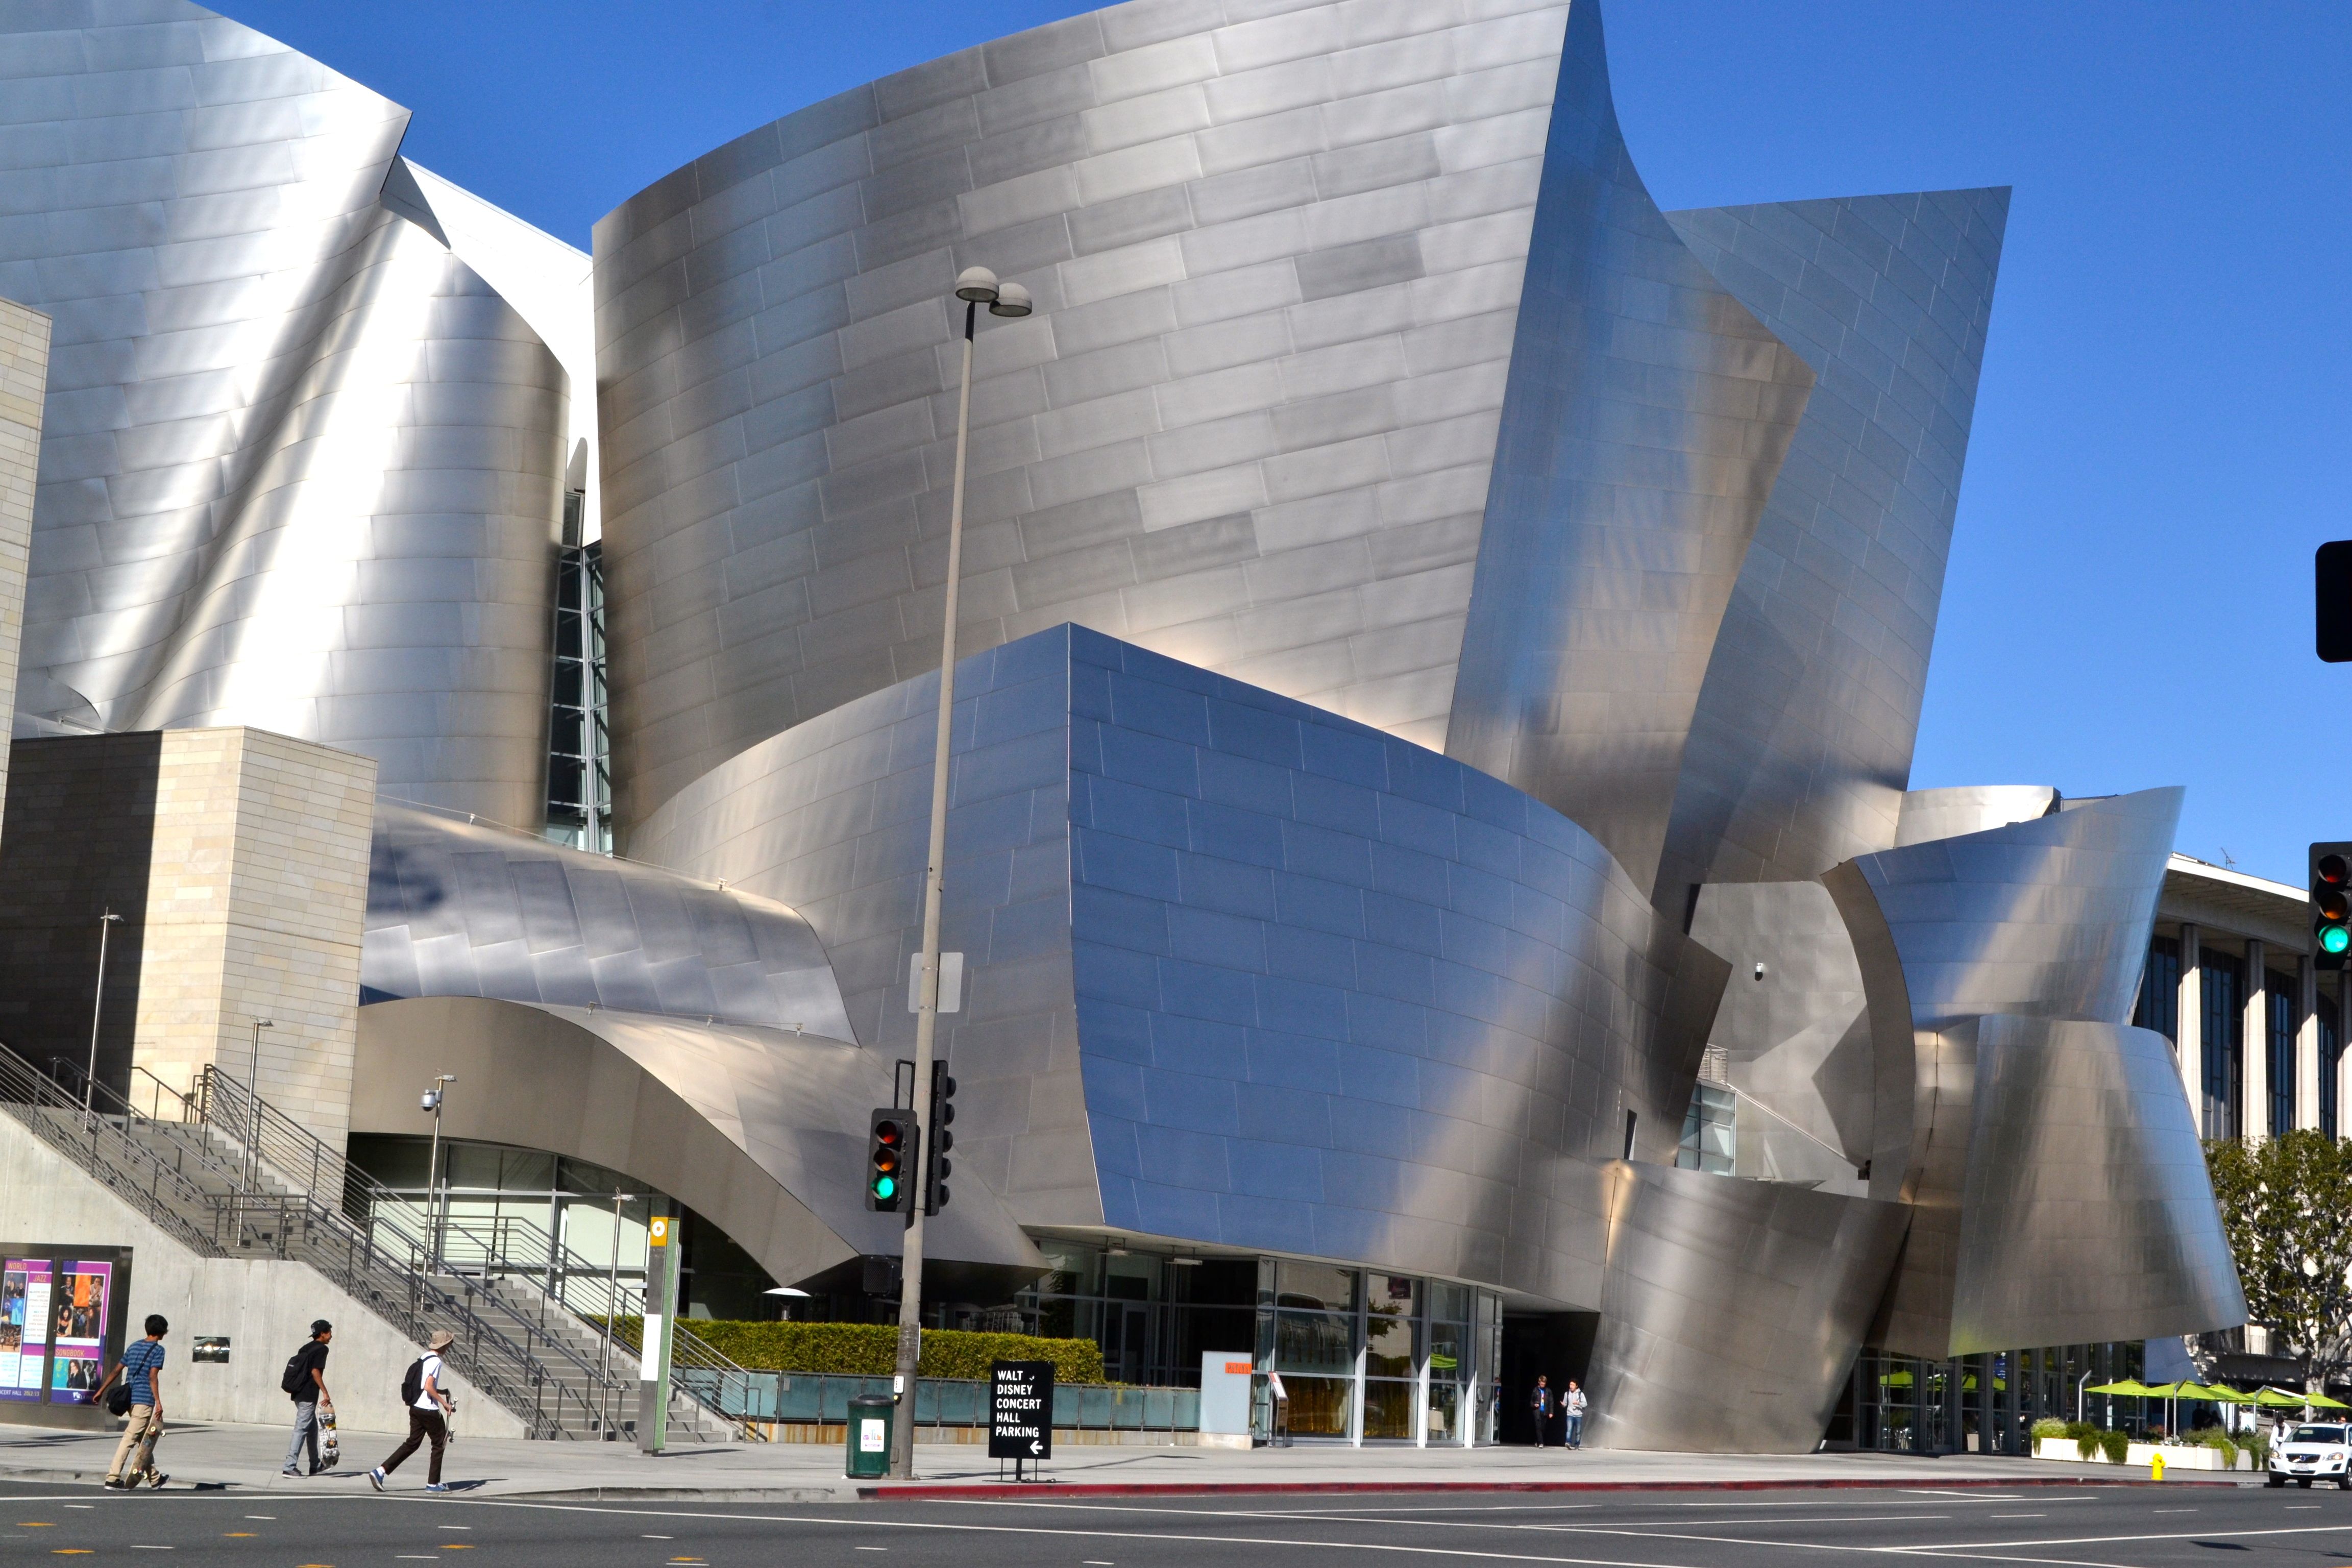 More Walt Disney Concert Hall…Discovering geometry and steel ...